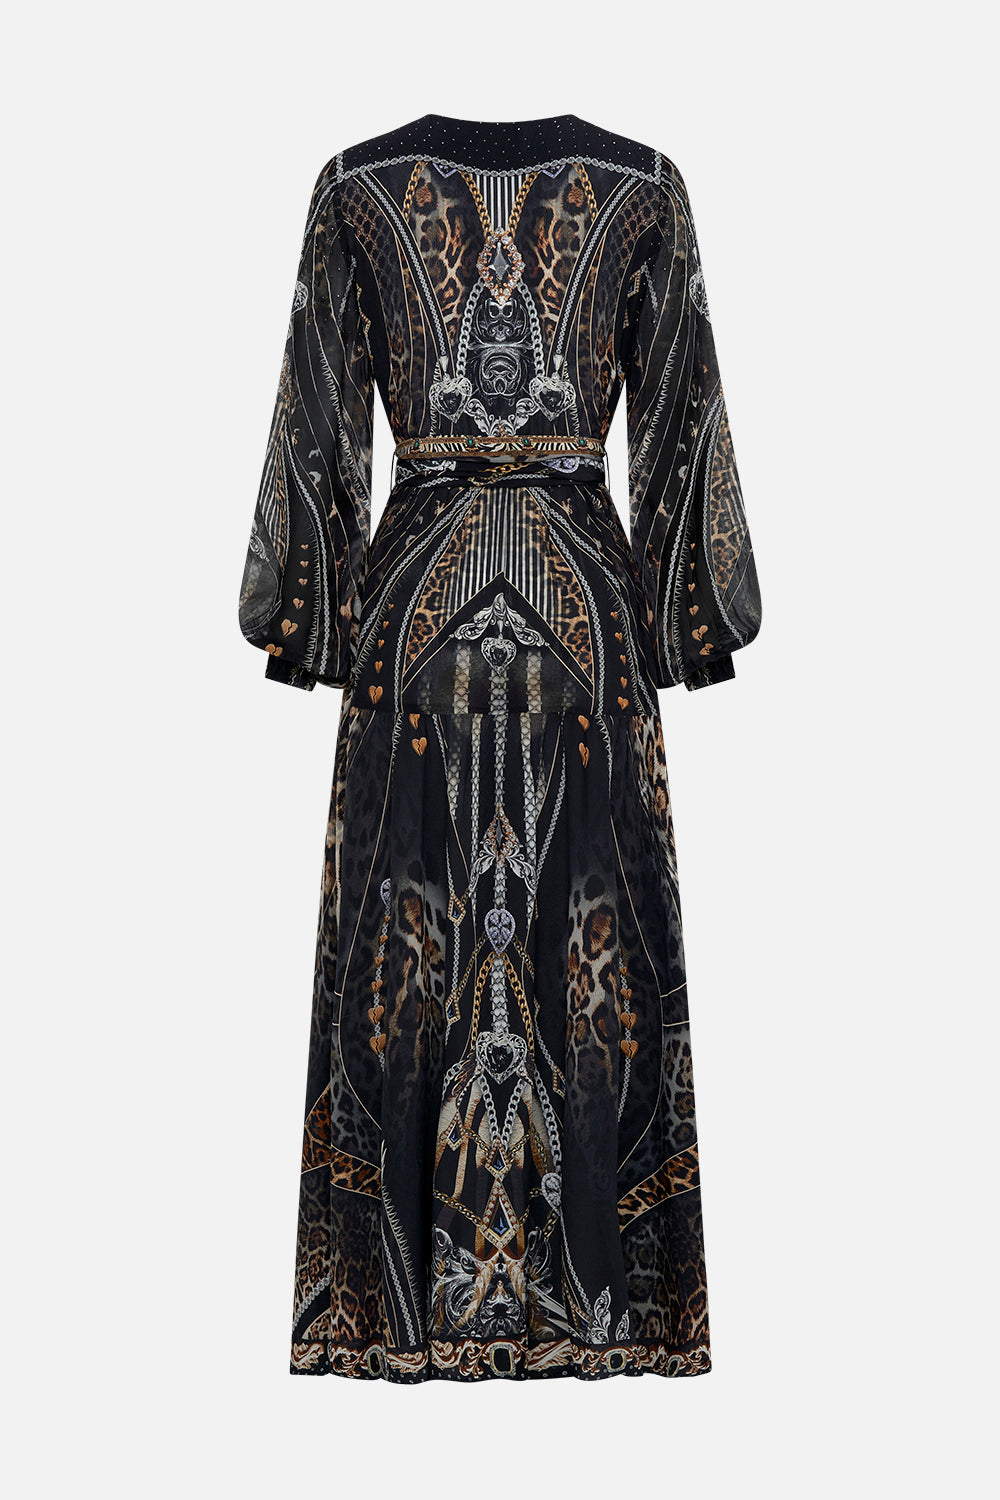 Back product view of CAMILLA silk maxi dress in Chaos In The Cosmos animal print